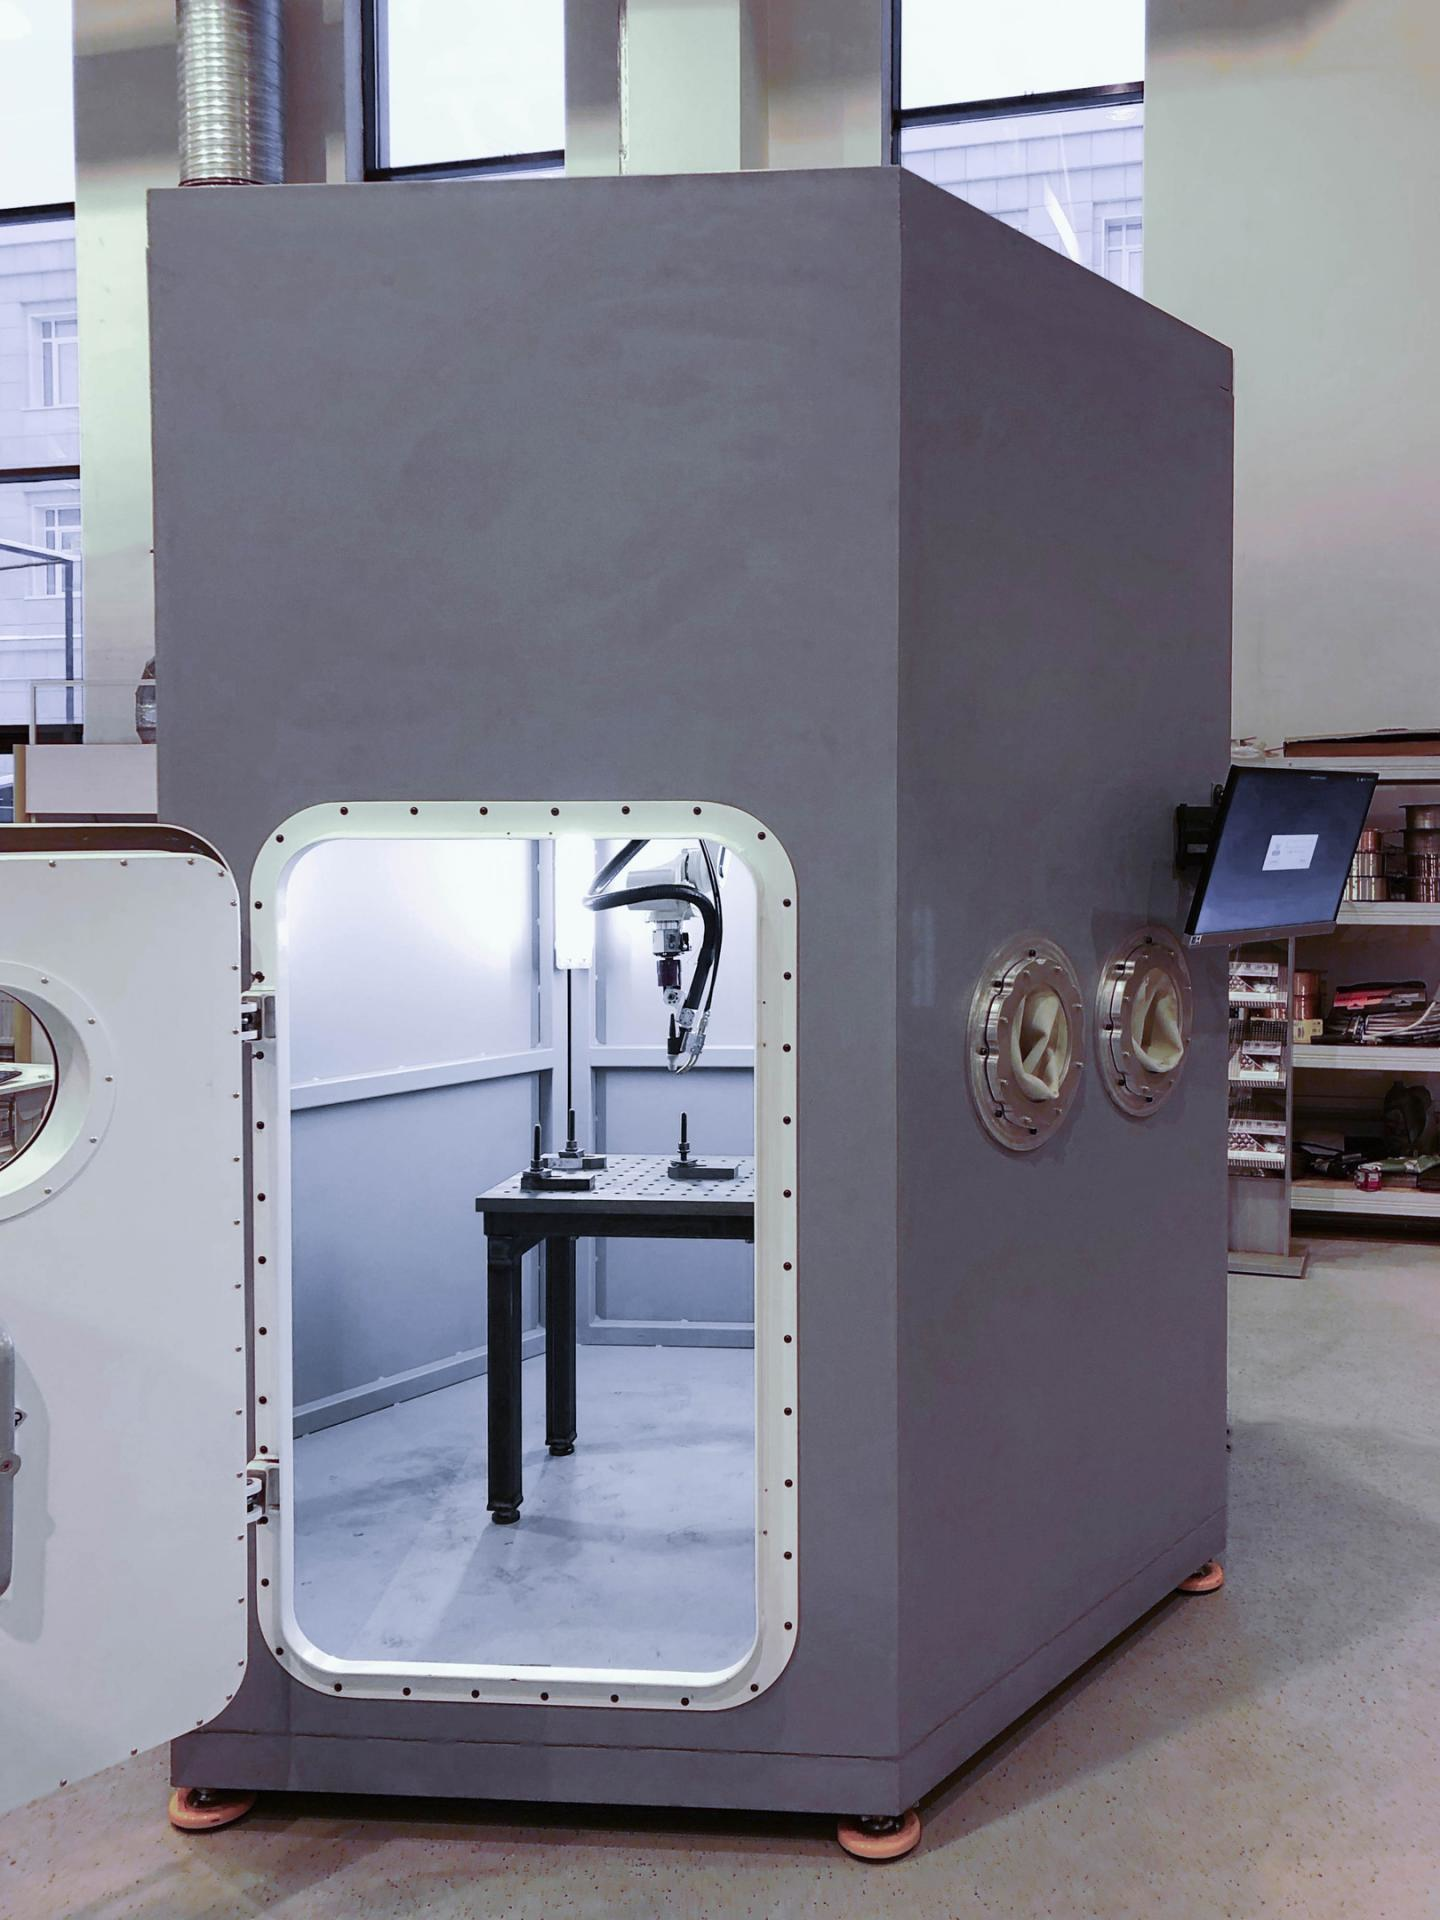 3D printer for high-speed printing of titanium structures and in-situ synthesis of alloys.